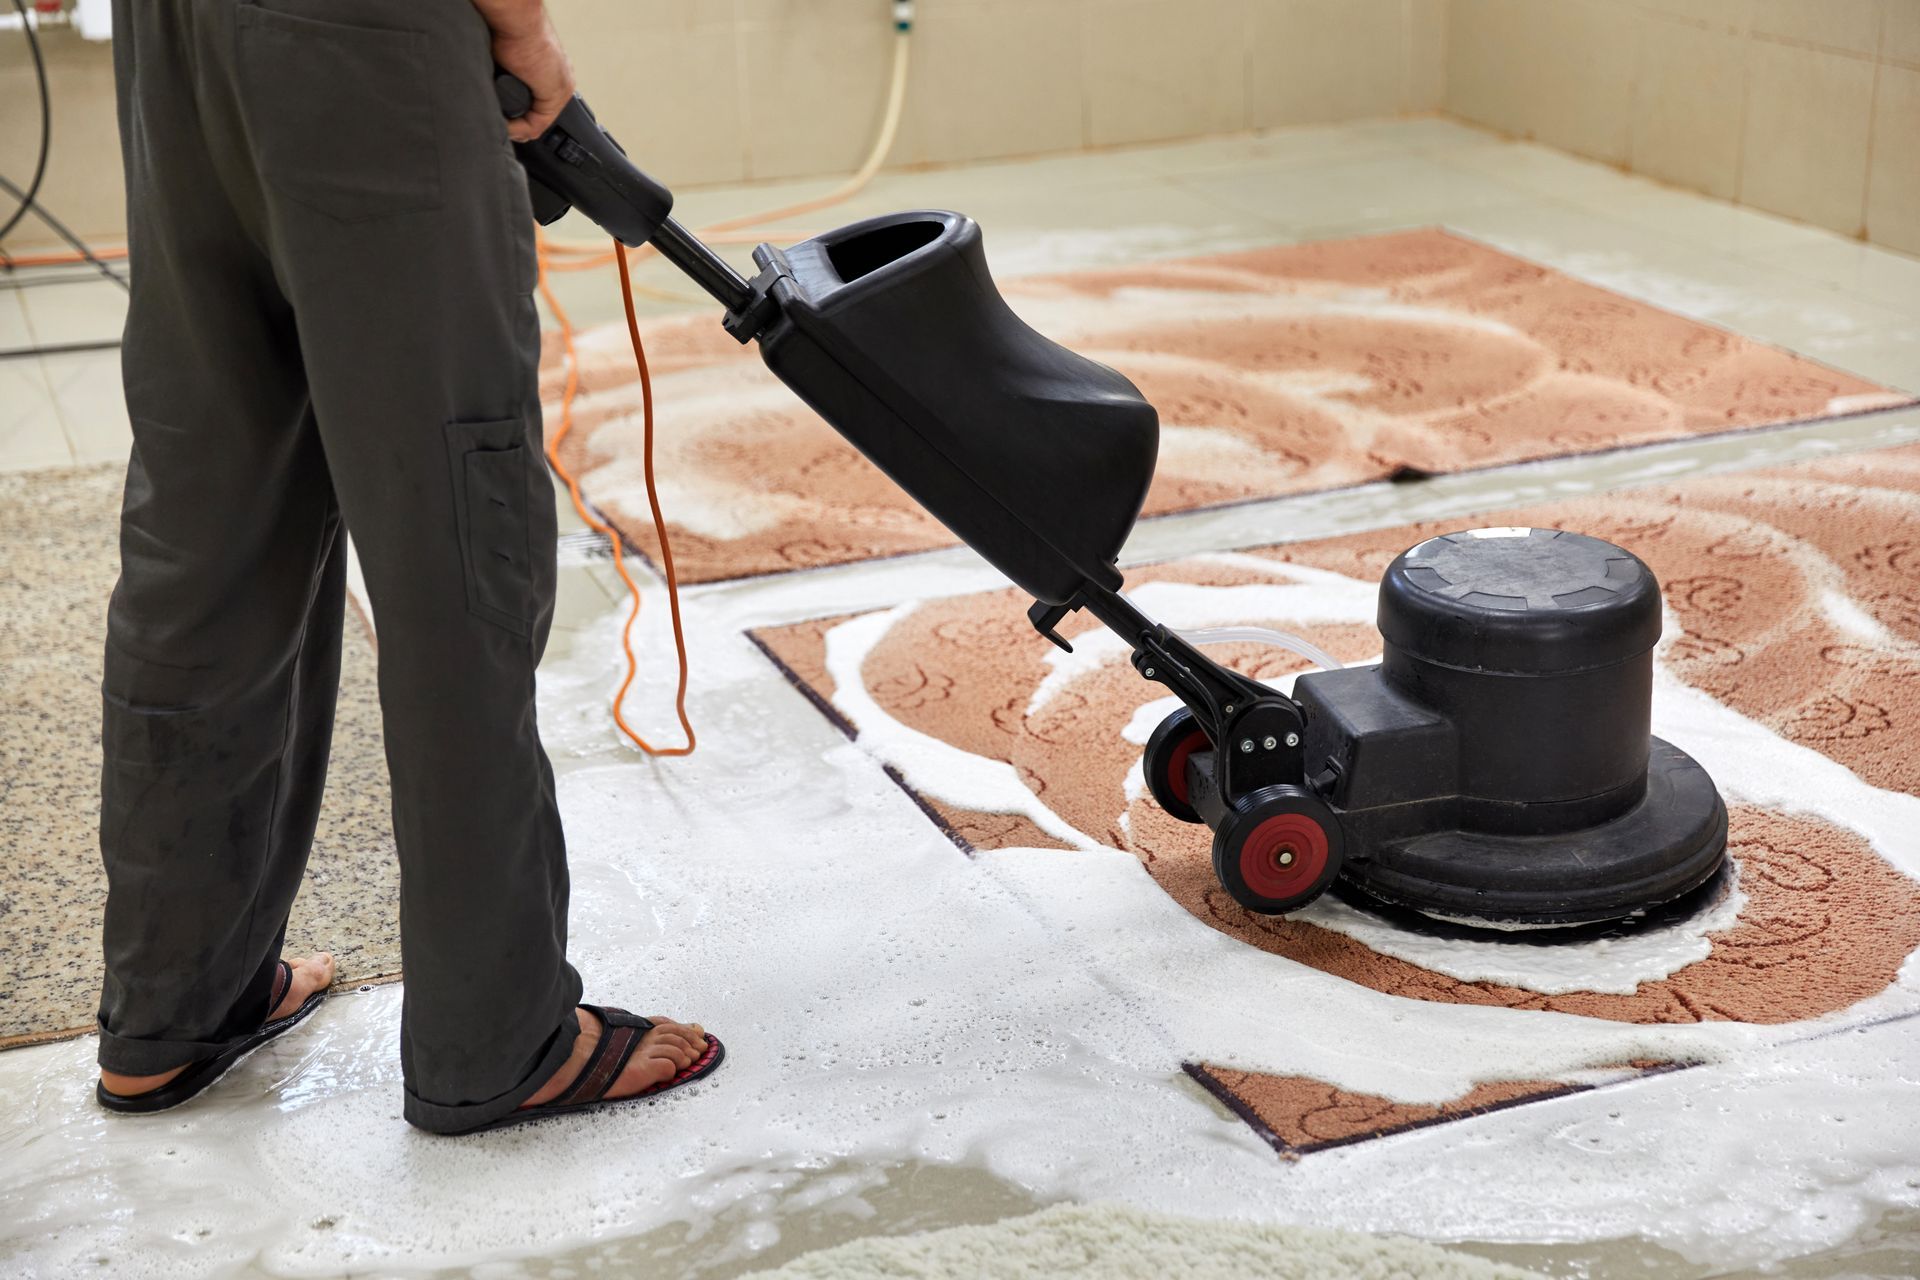 a man is using a machine to clean a rug on the floor .